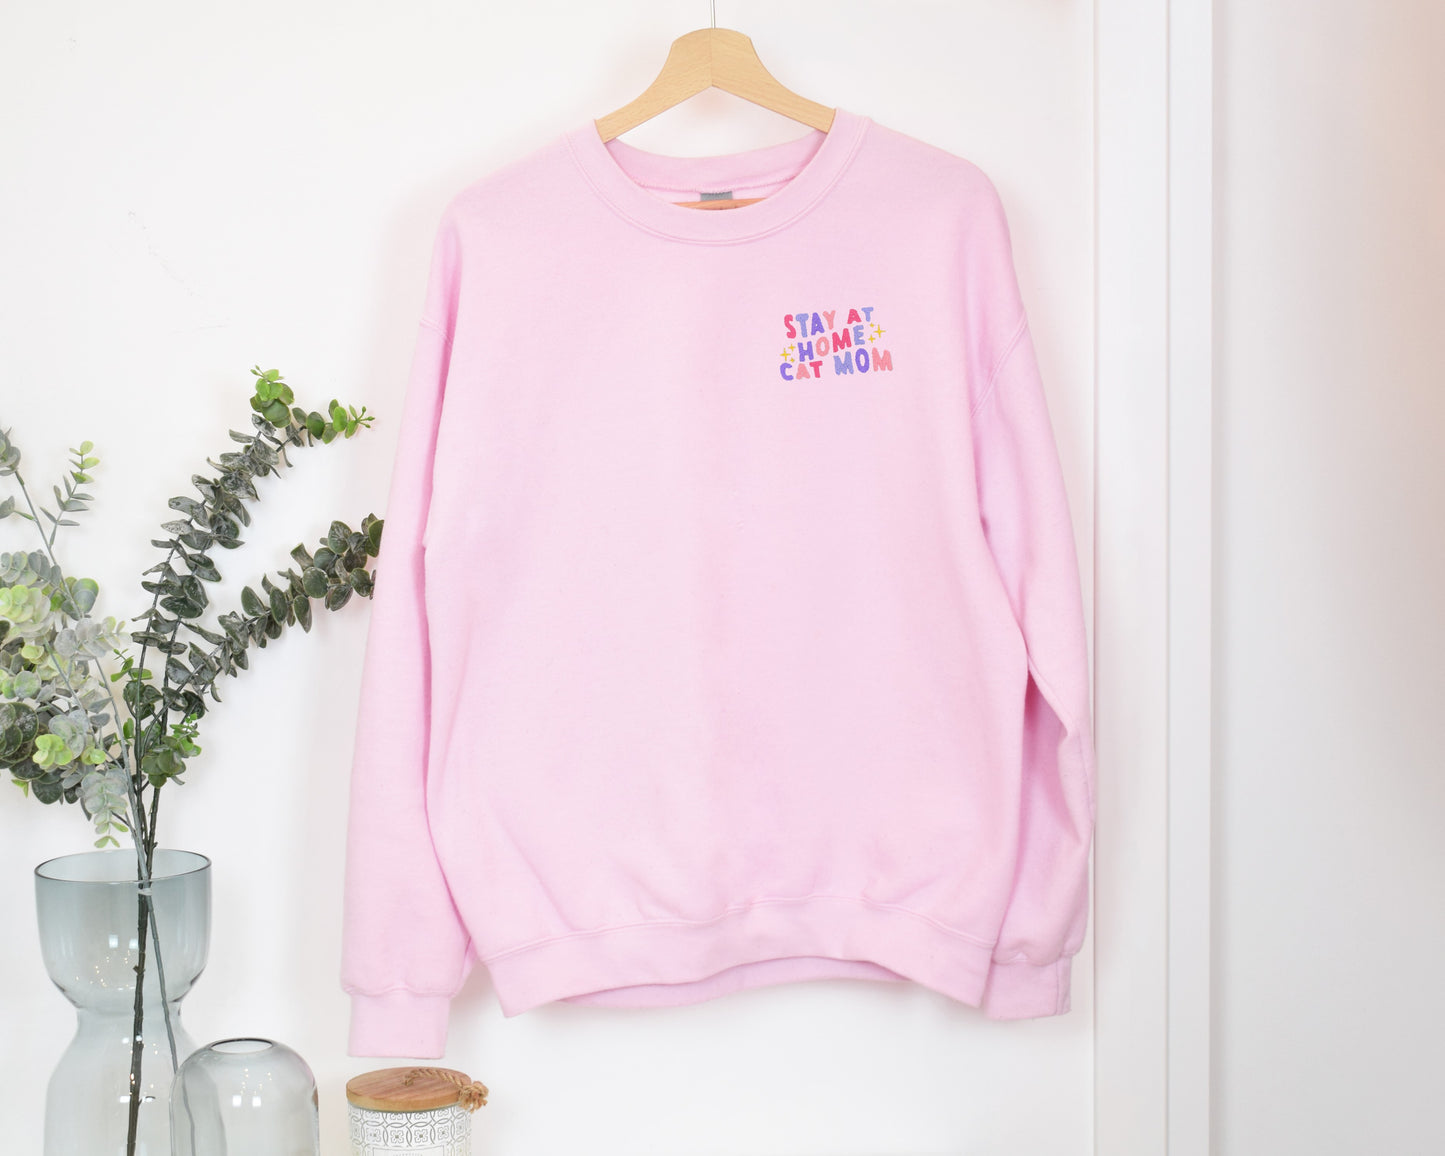 Stay at Home Cat Mom Embroidered Unisex Crewneck Sweatshirt